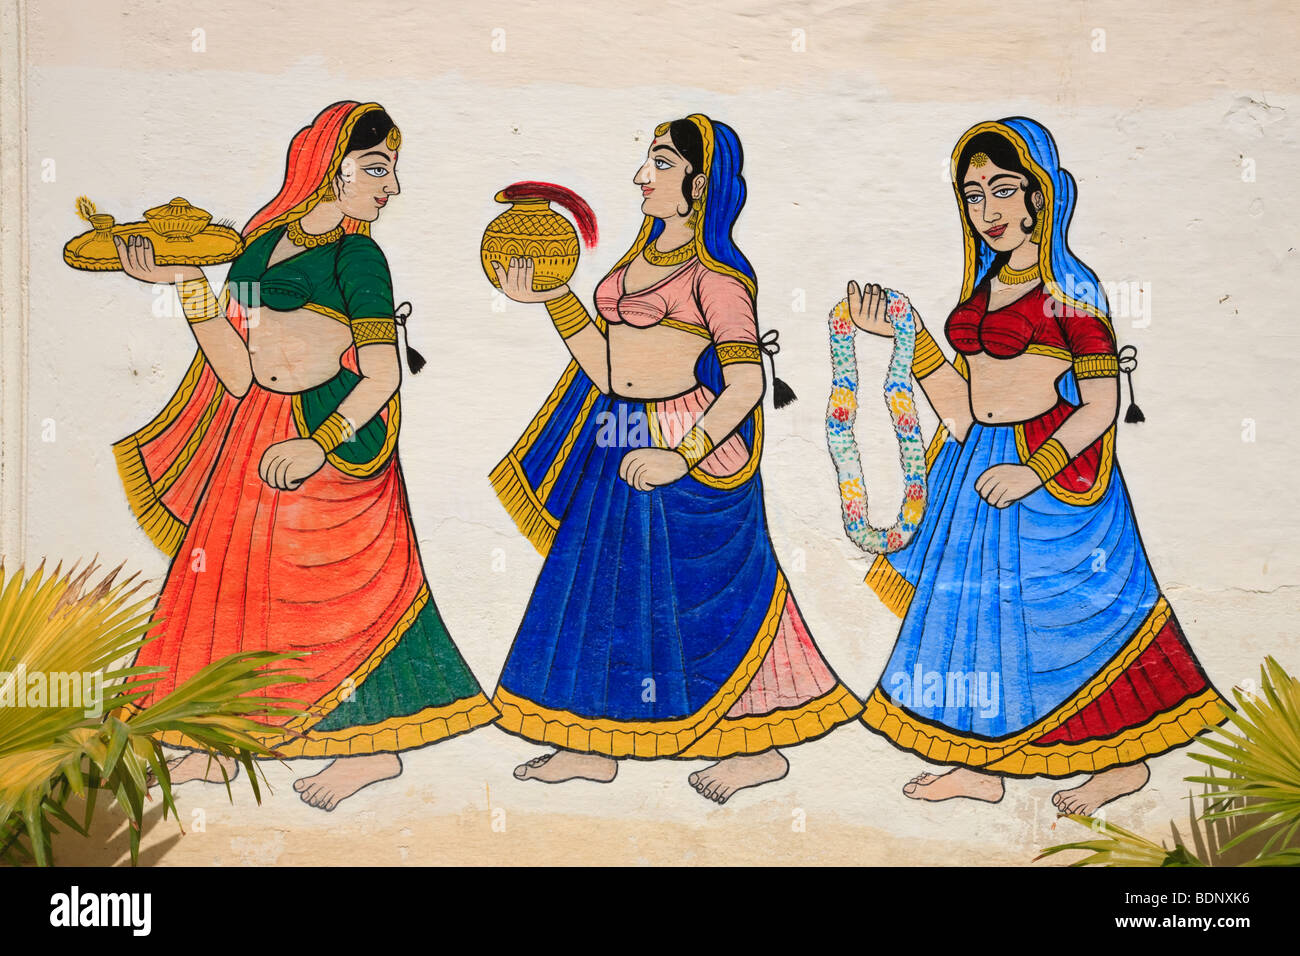 A Wall Painting Of Indian Women In Saris In The City Palace Udiapur Stock Photo Alamy